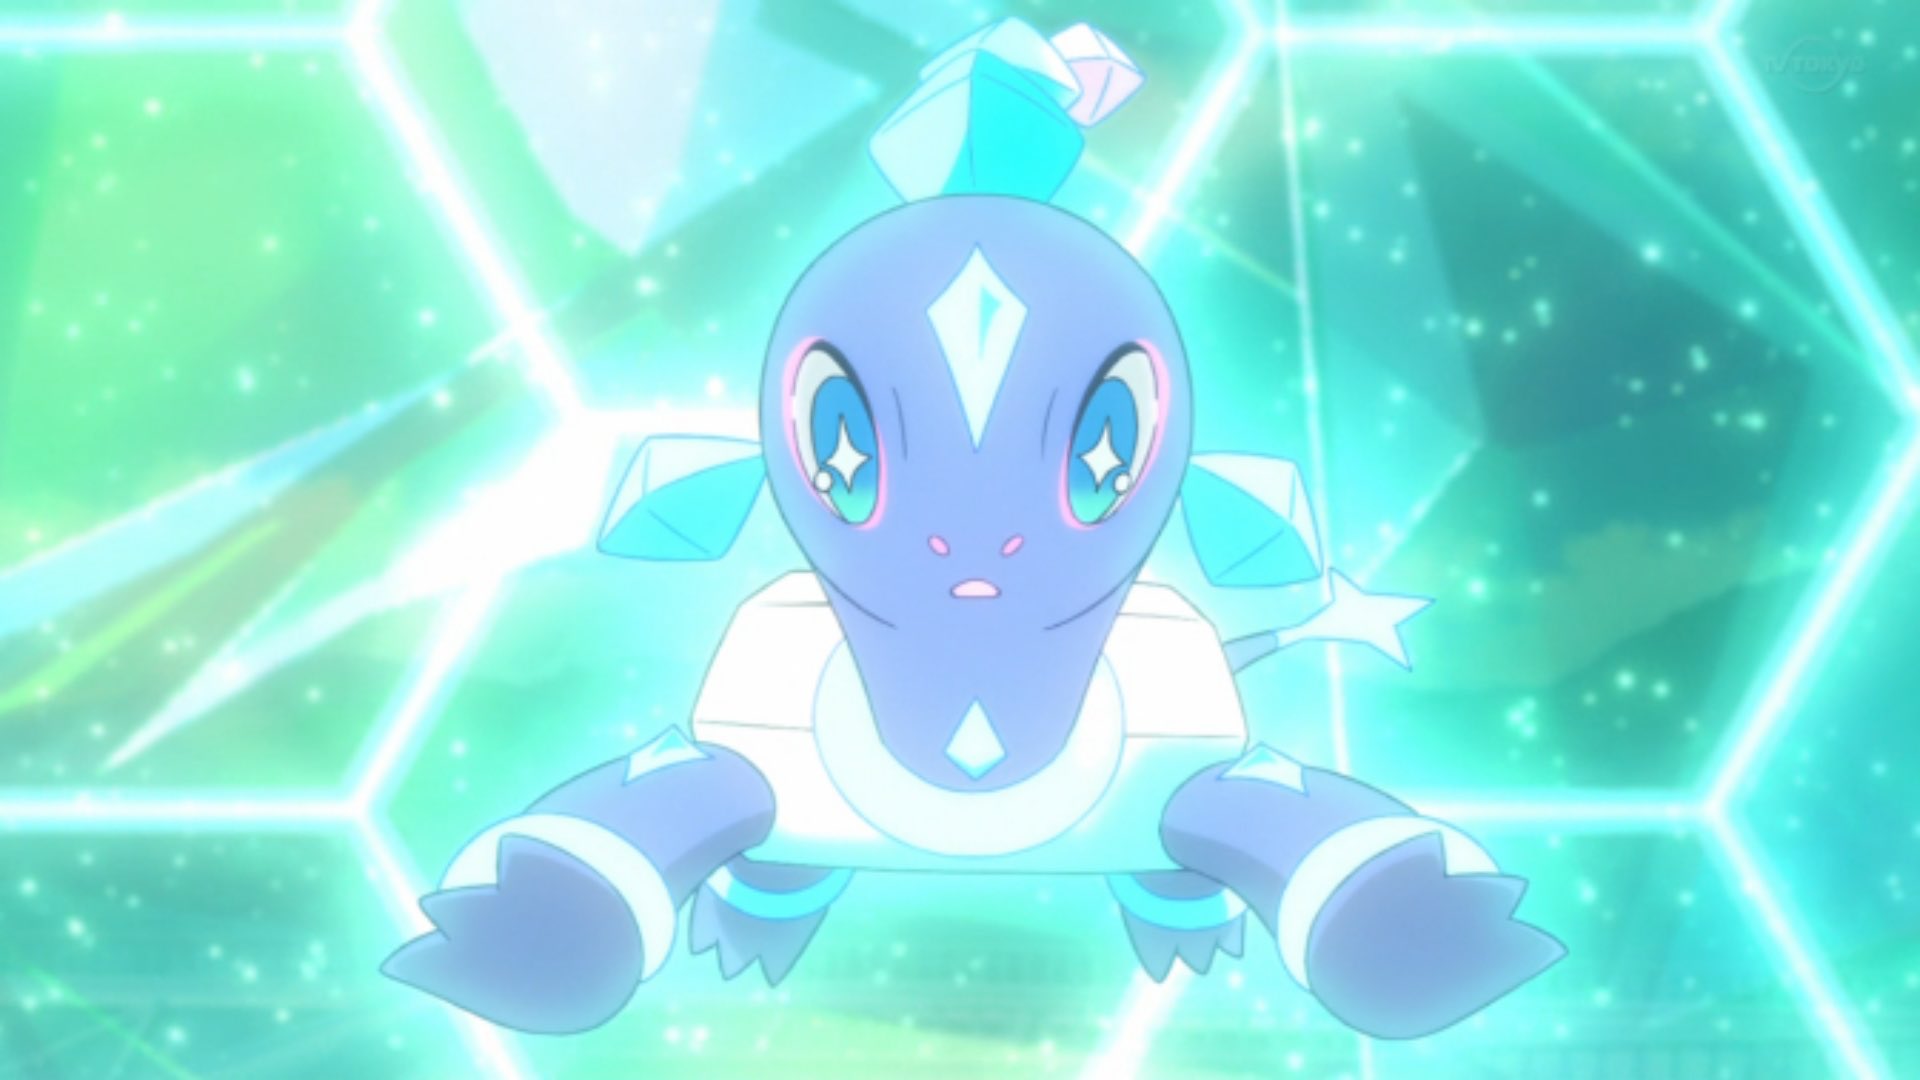 Synopsis for the first 'Pokemon Horizons' episode appears to be